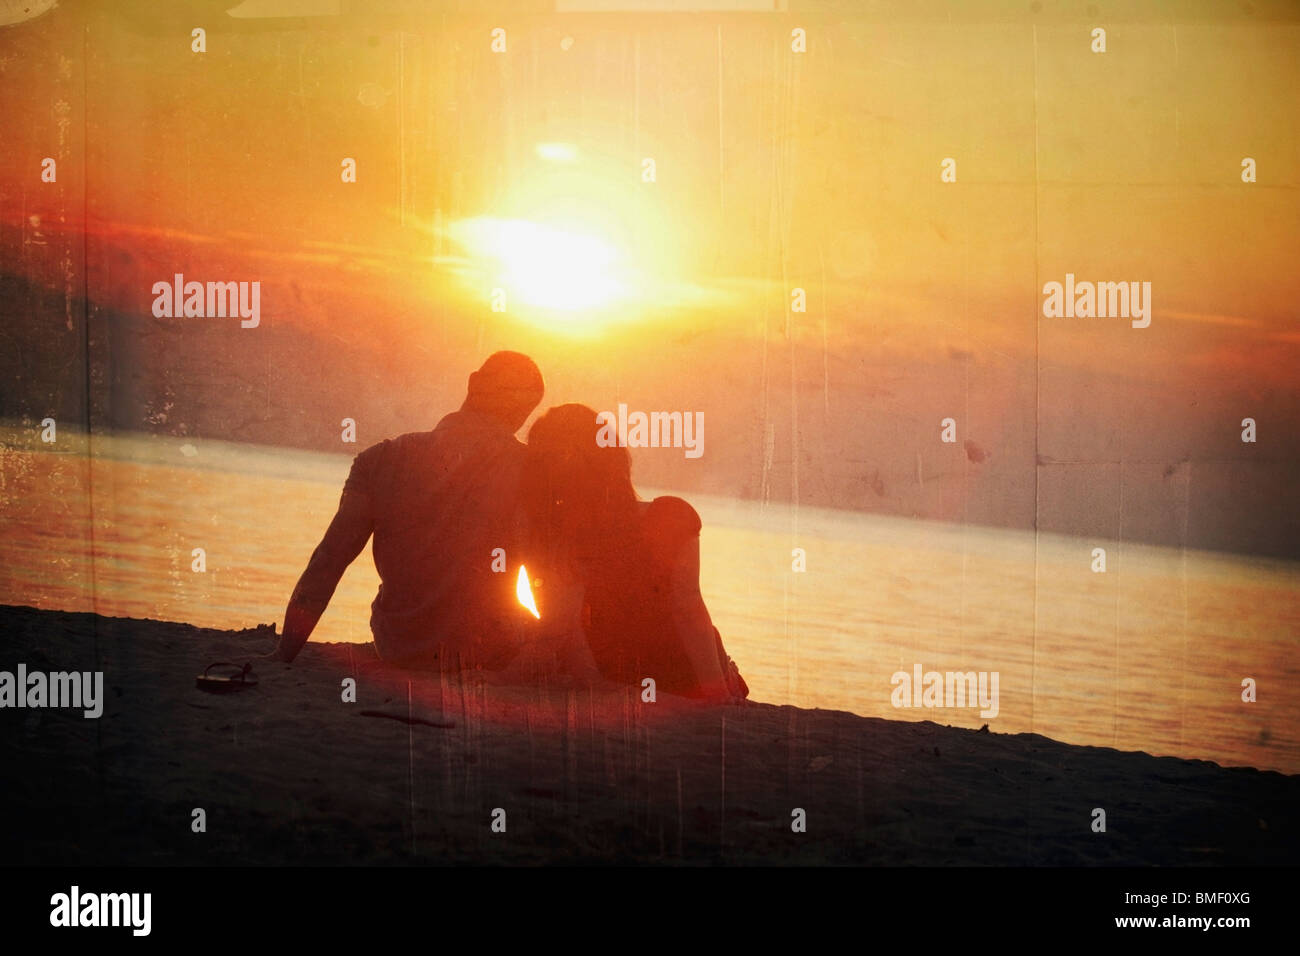 A Man And Woman Sitting On The Beach In A Sunset Stock Photo